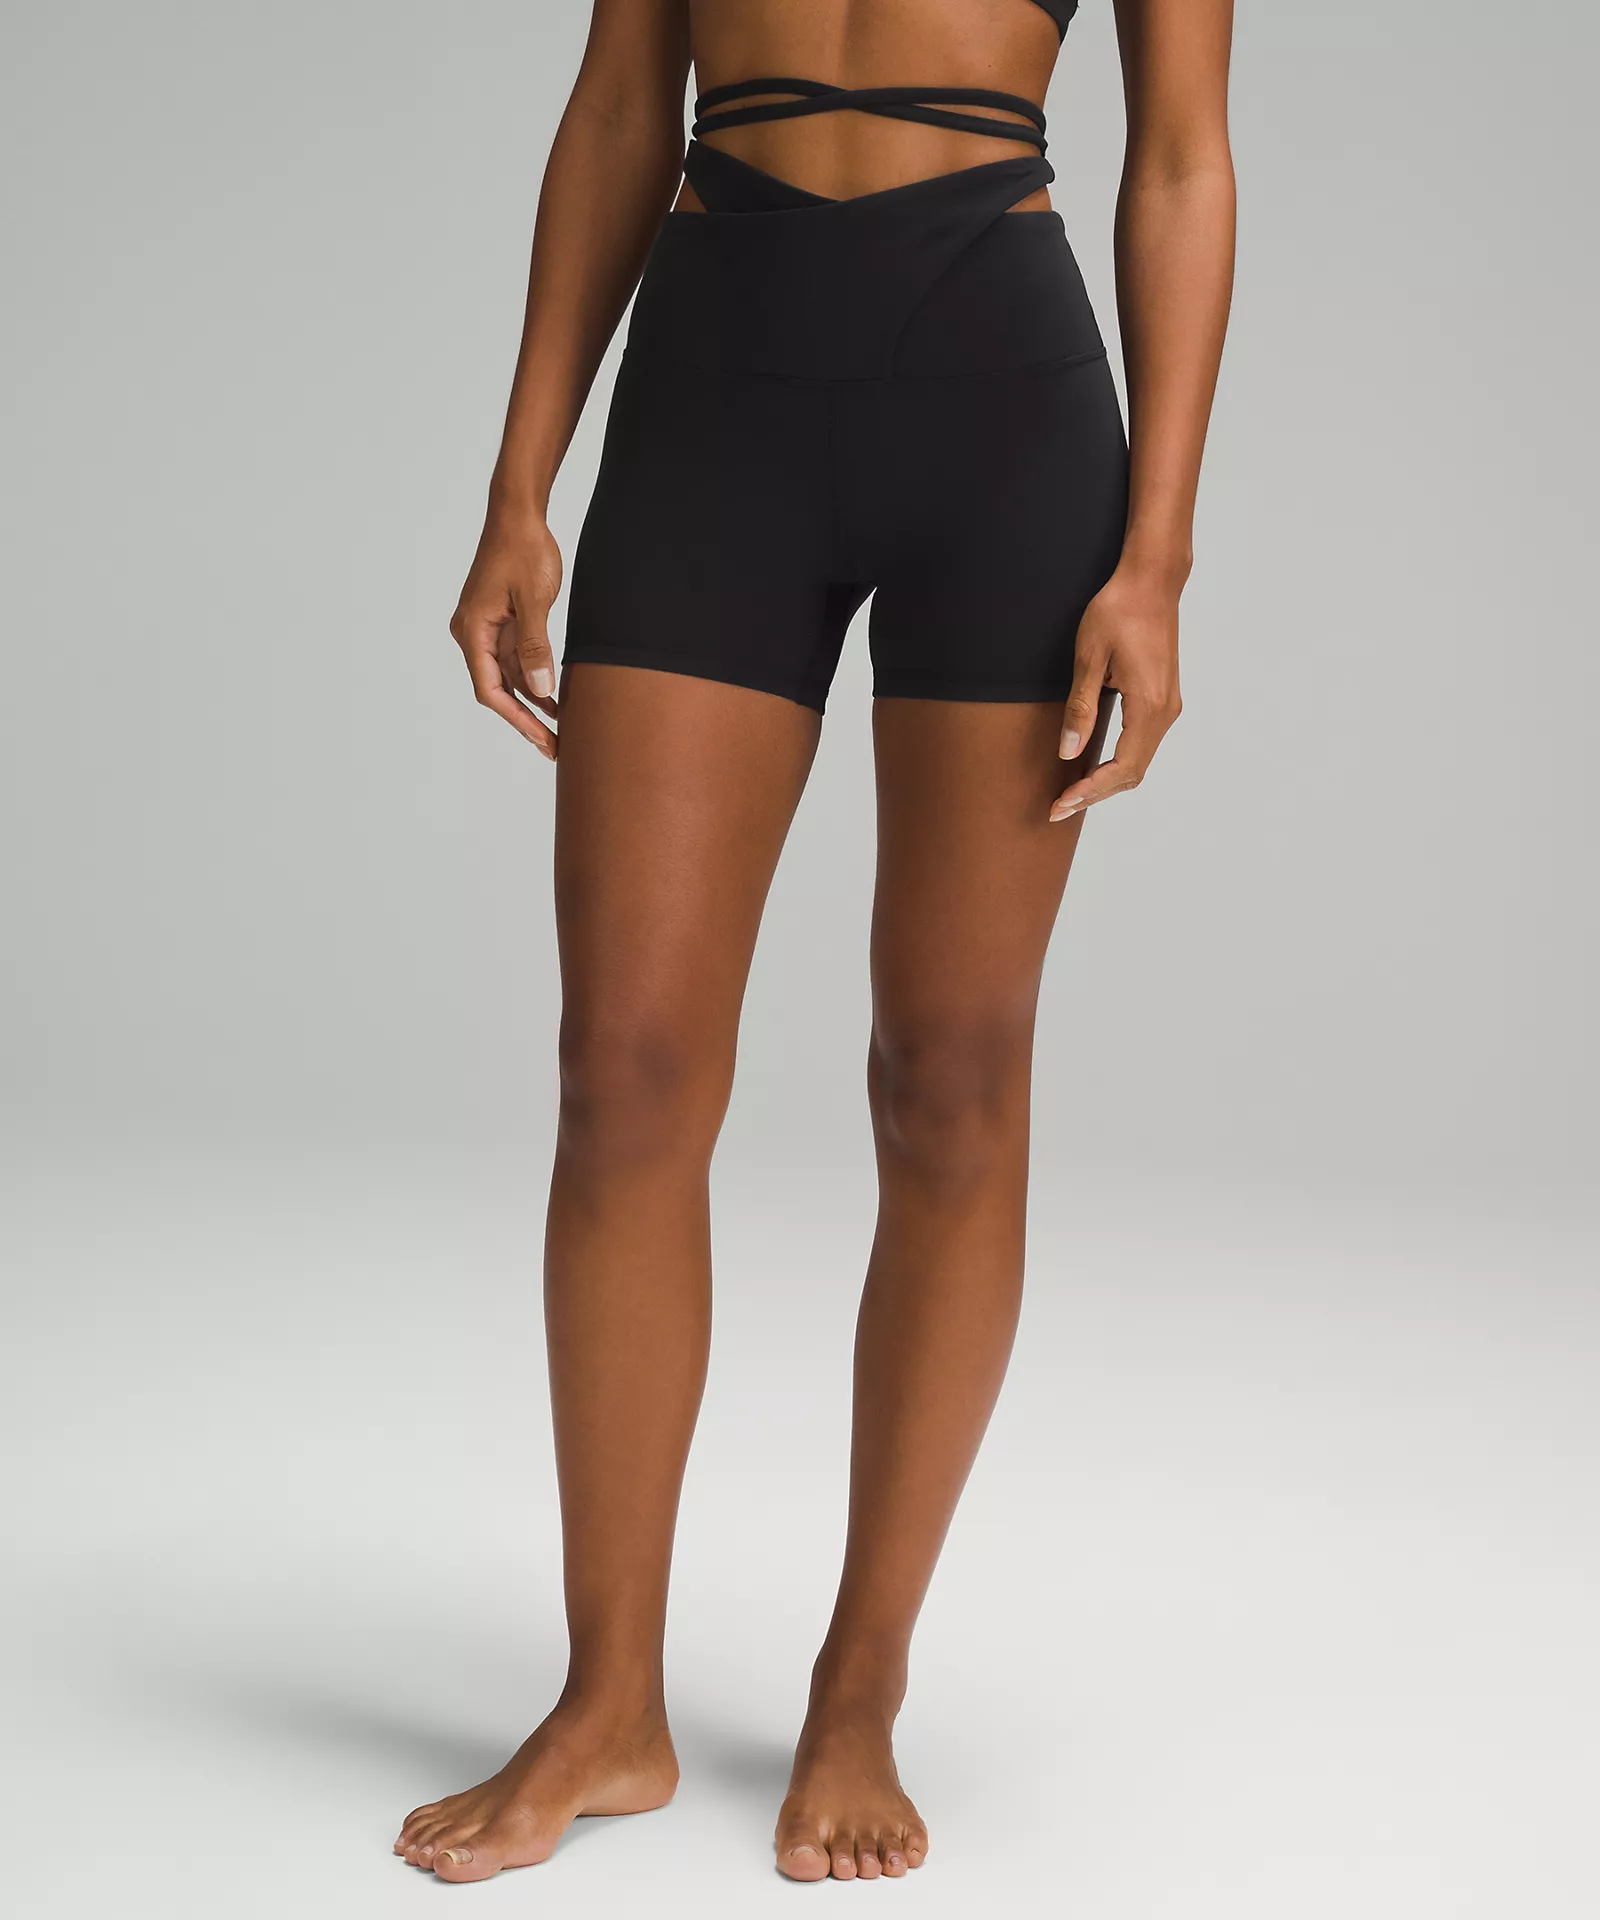 The 10 Best Women's Yoga Shorts to Wear On and Off Your Mat (Reviews and  Guide) - The Yoga Nomads